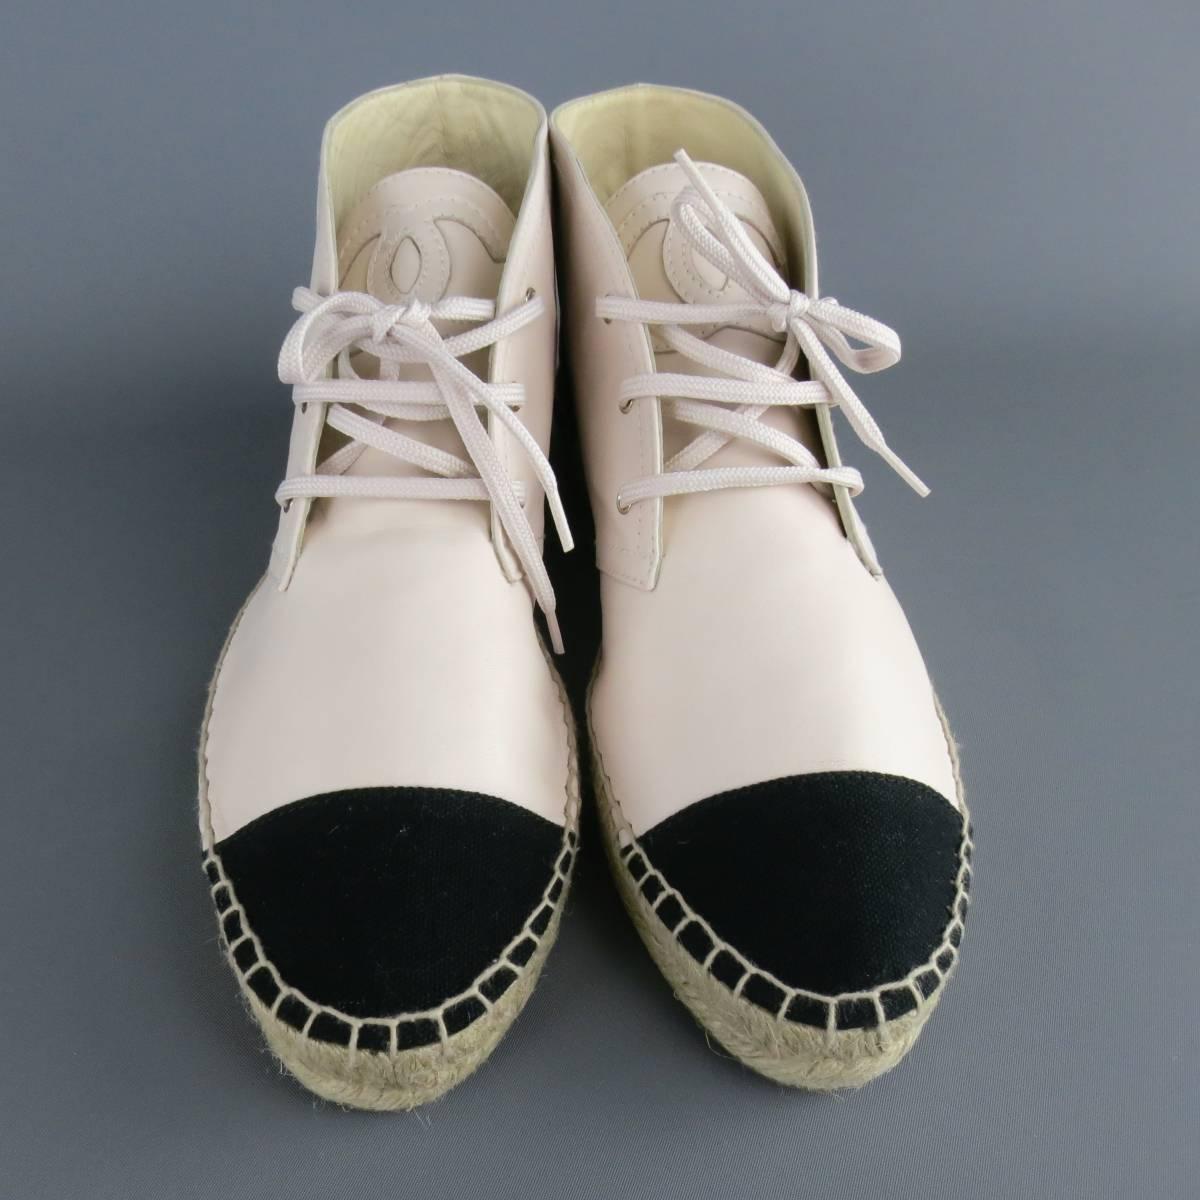 Women's CHANEL Size 12 Light Pink & Black Leather & Canvas Espadrille Chukka Boots